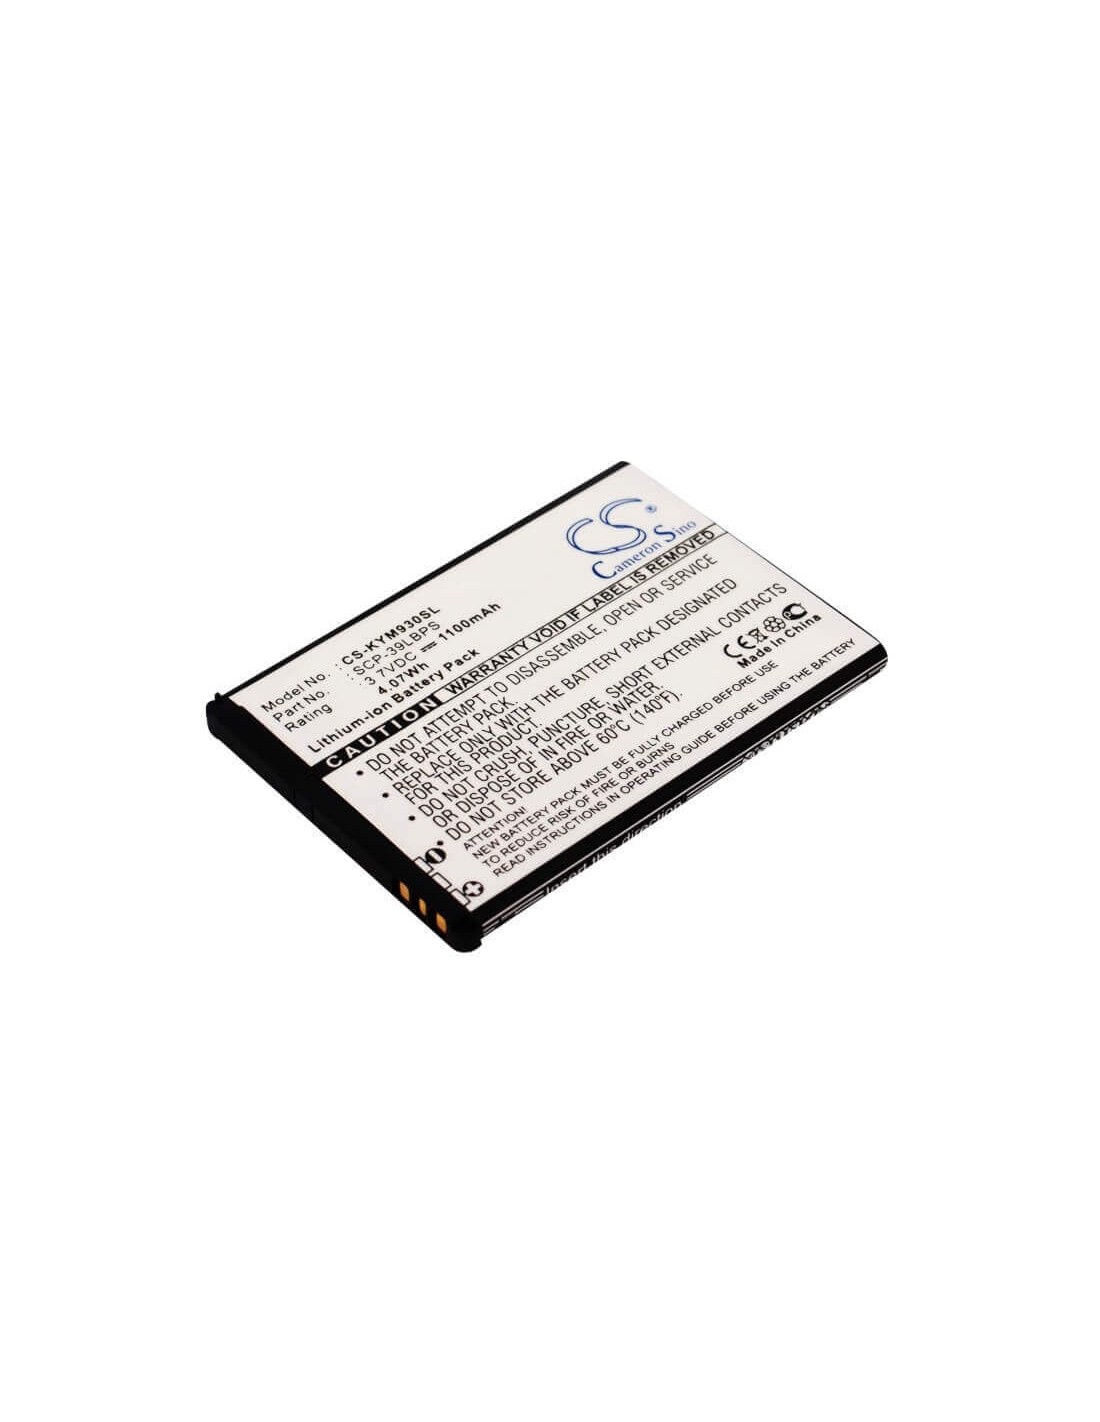 Battery for Kyocera Echo, M9300, SCP-9300 3.7V, 1100mAh - 4.07Wh